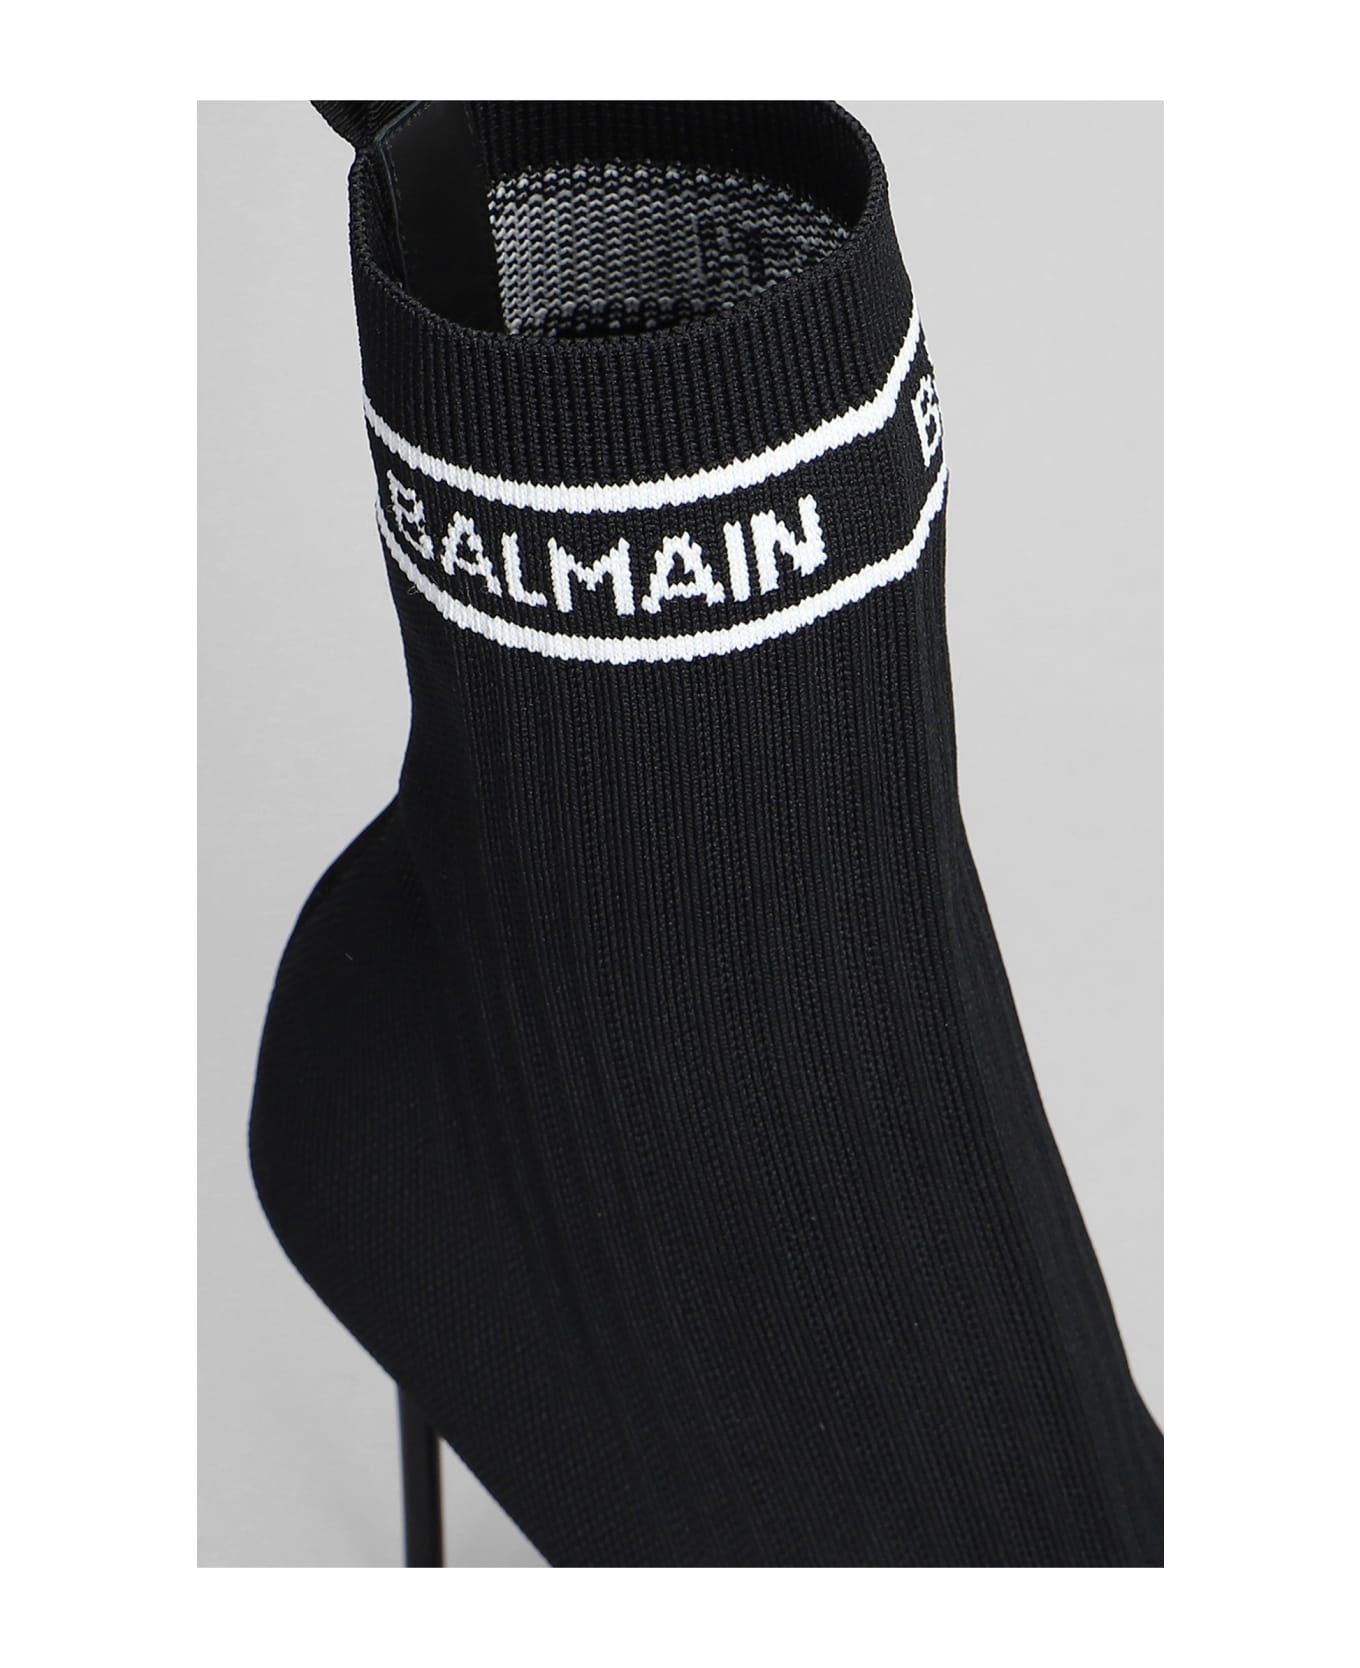 Balmain High Heels Ankle Boots In Black Polyester - black ブーツ